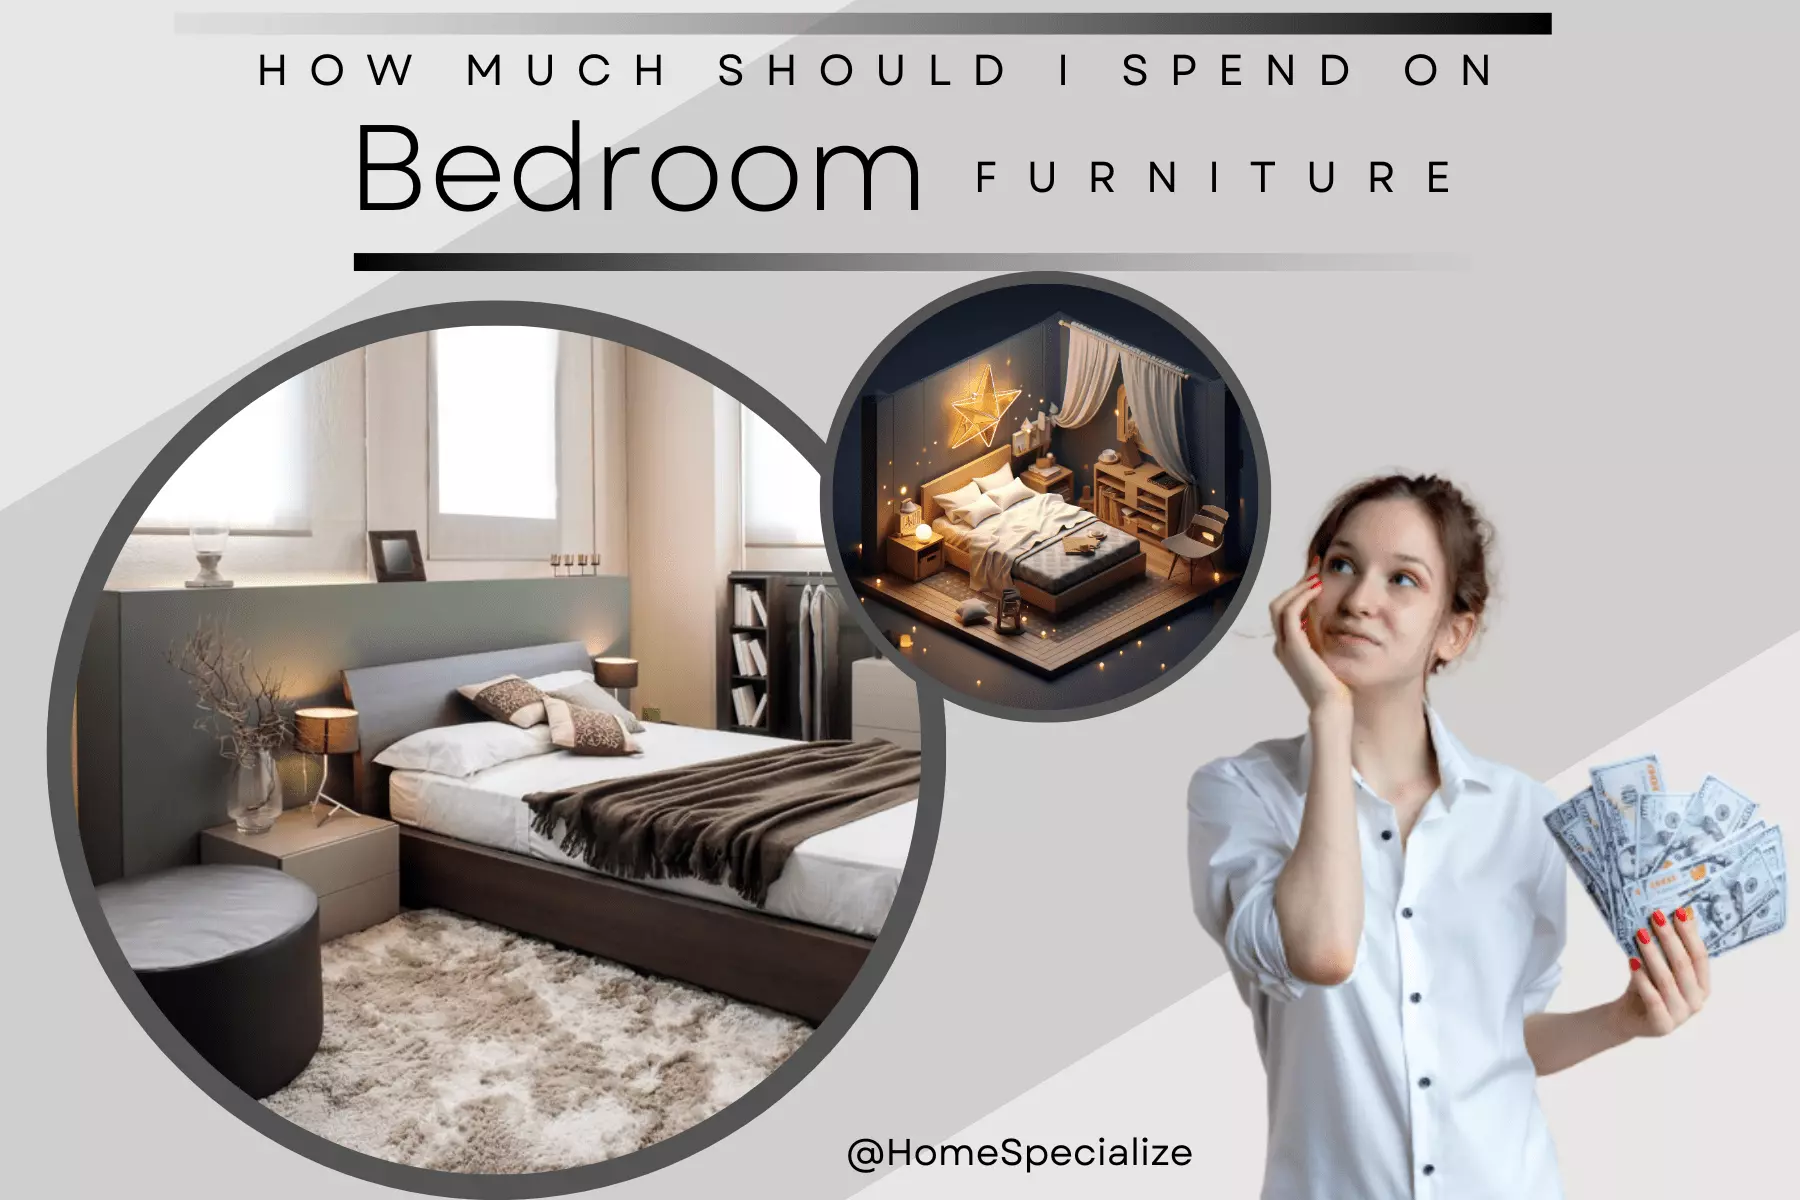 How Much Should I Spend on Bedroom Furniture? Price of Comfort.